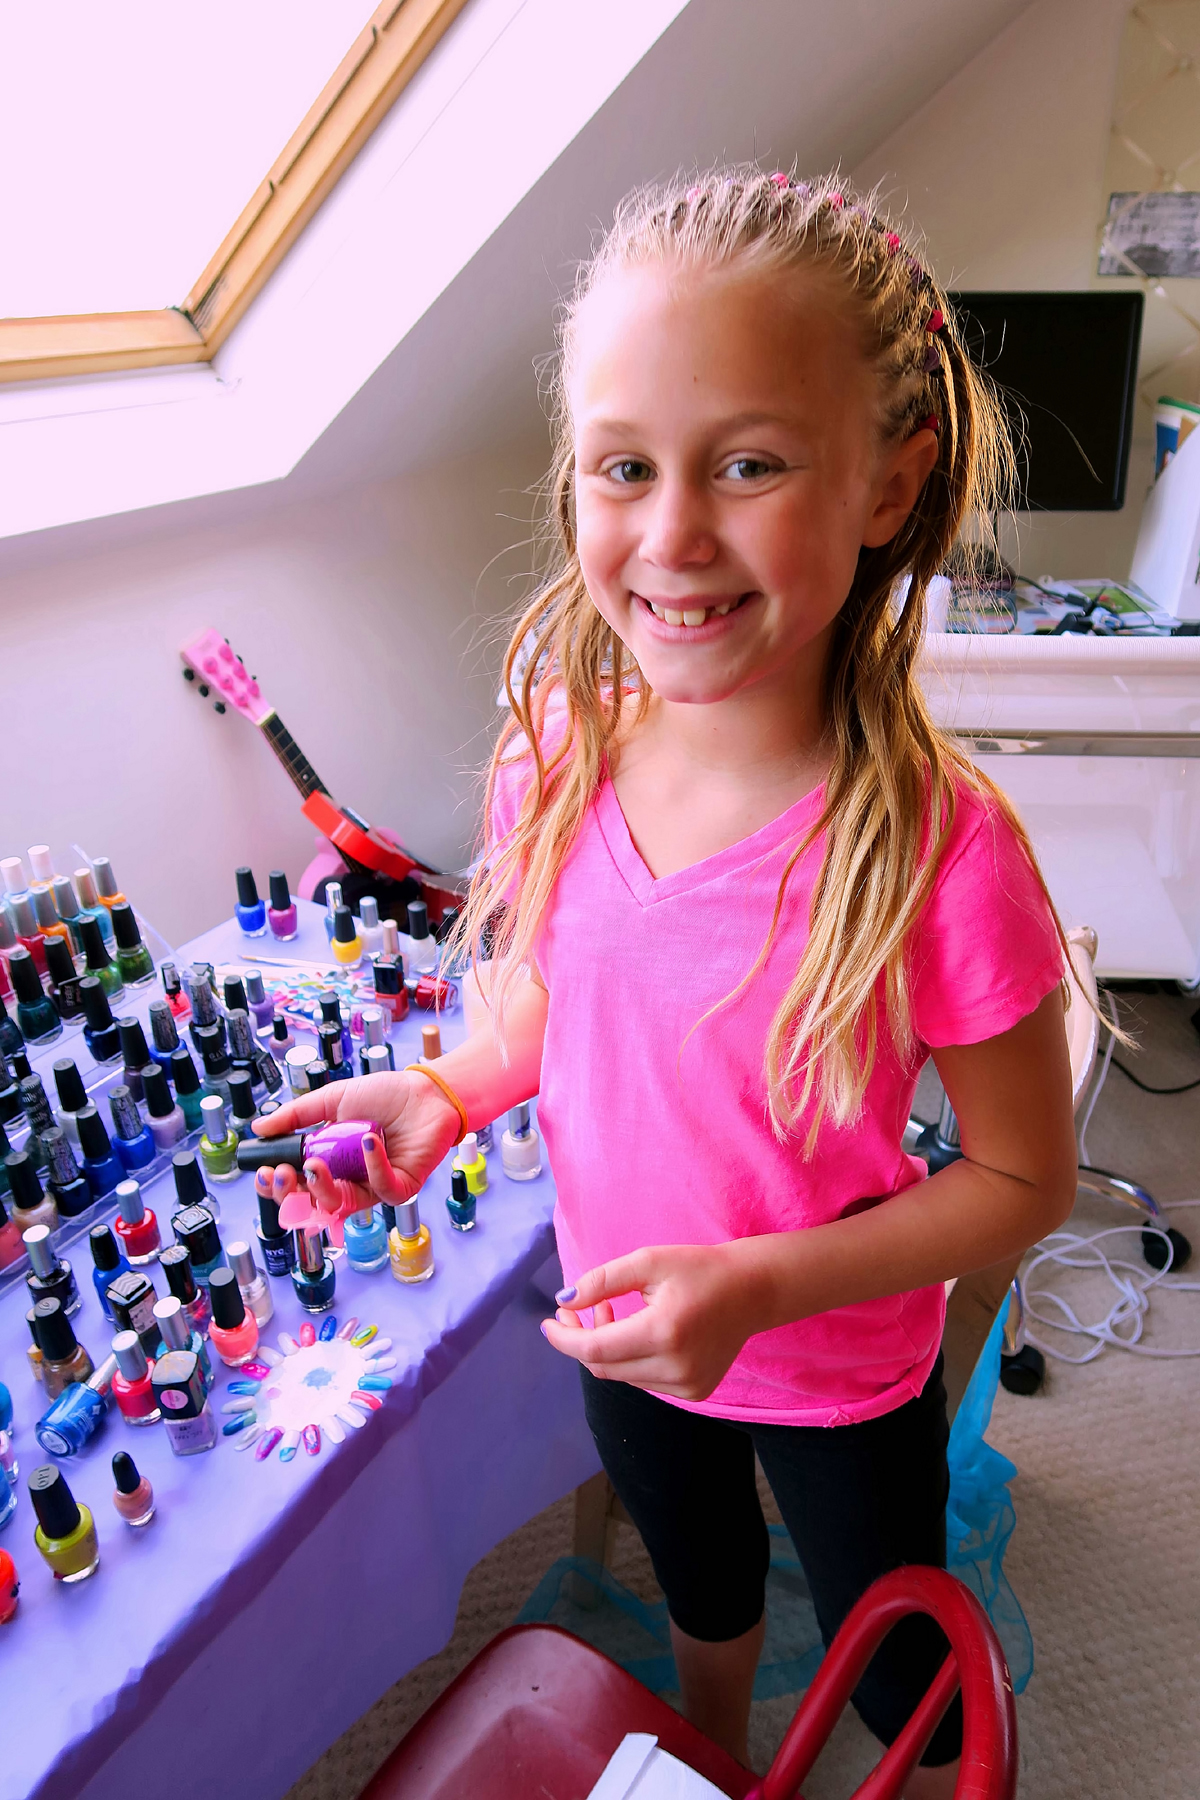 Riley Chooses A Cool Nail Polish For Her Toenails. 